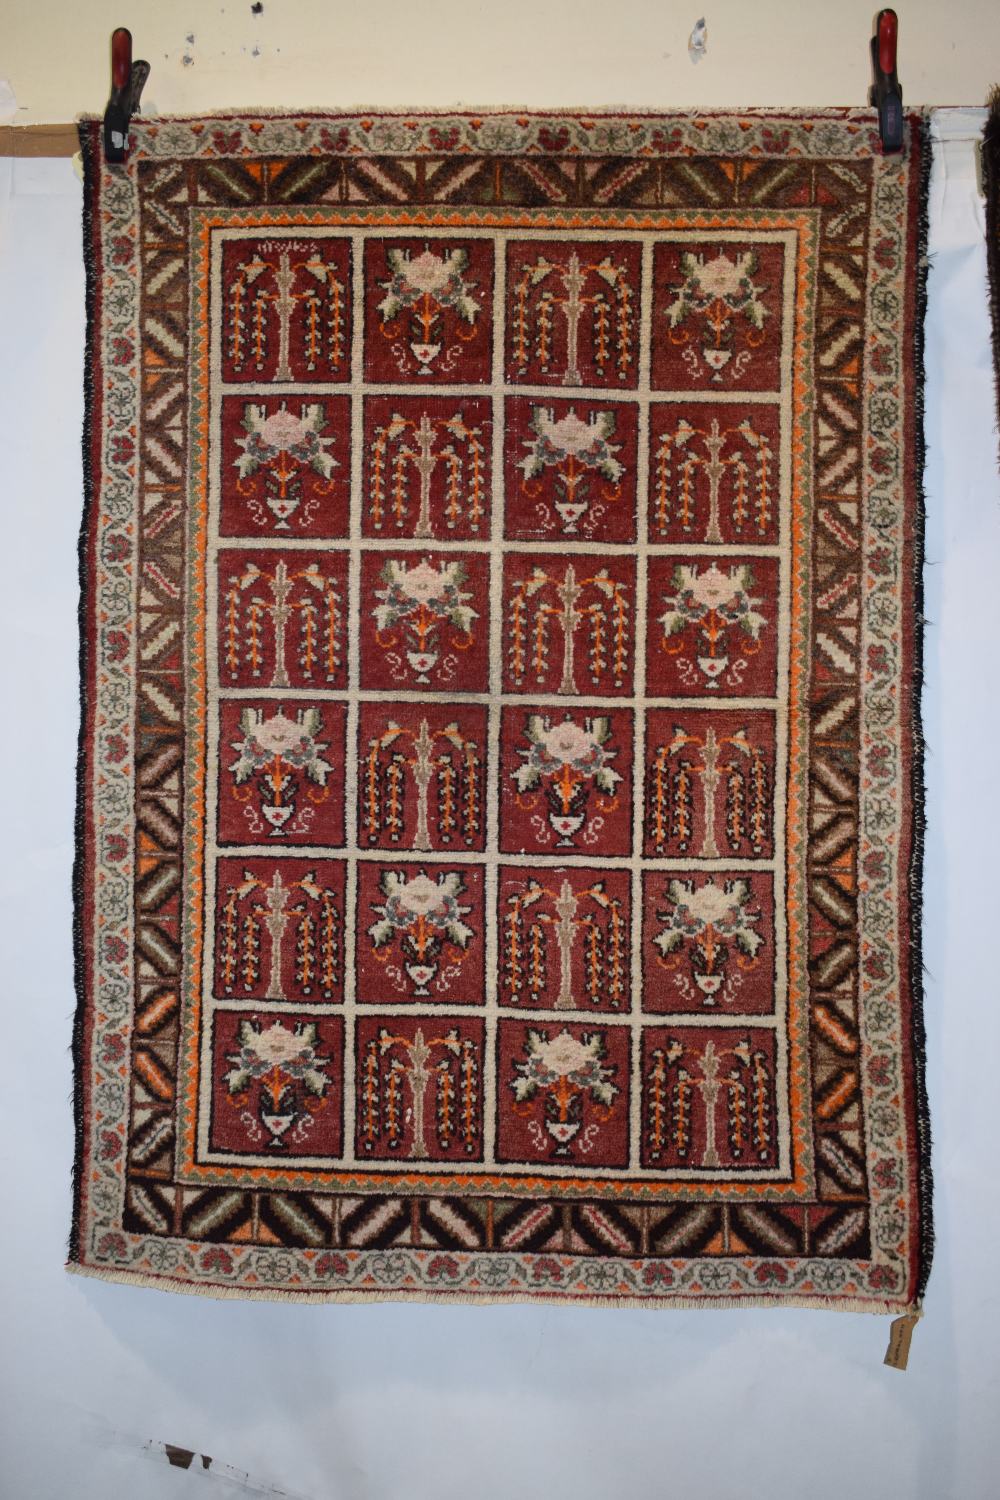 Two Persian rugs, the first: Fars, south west Persia, circa 1940s, 4ft. x 2ft. 10in. 1.22m. x 0.86m.